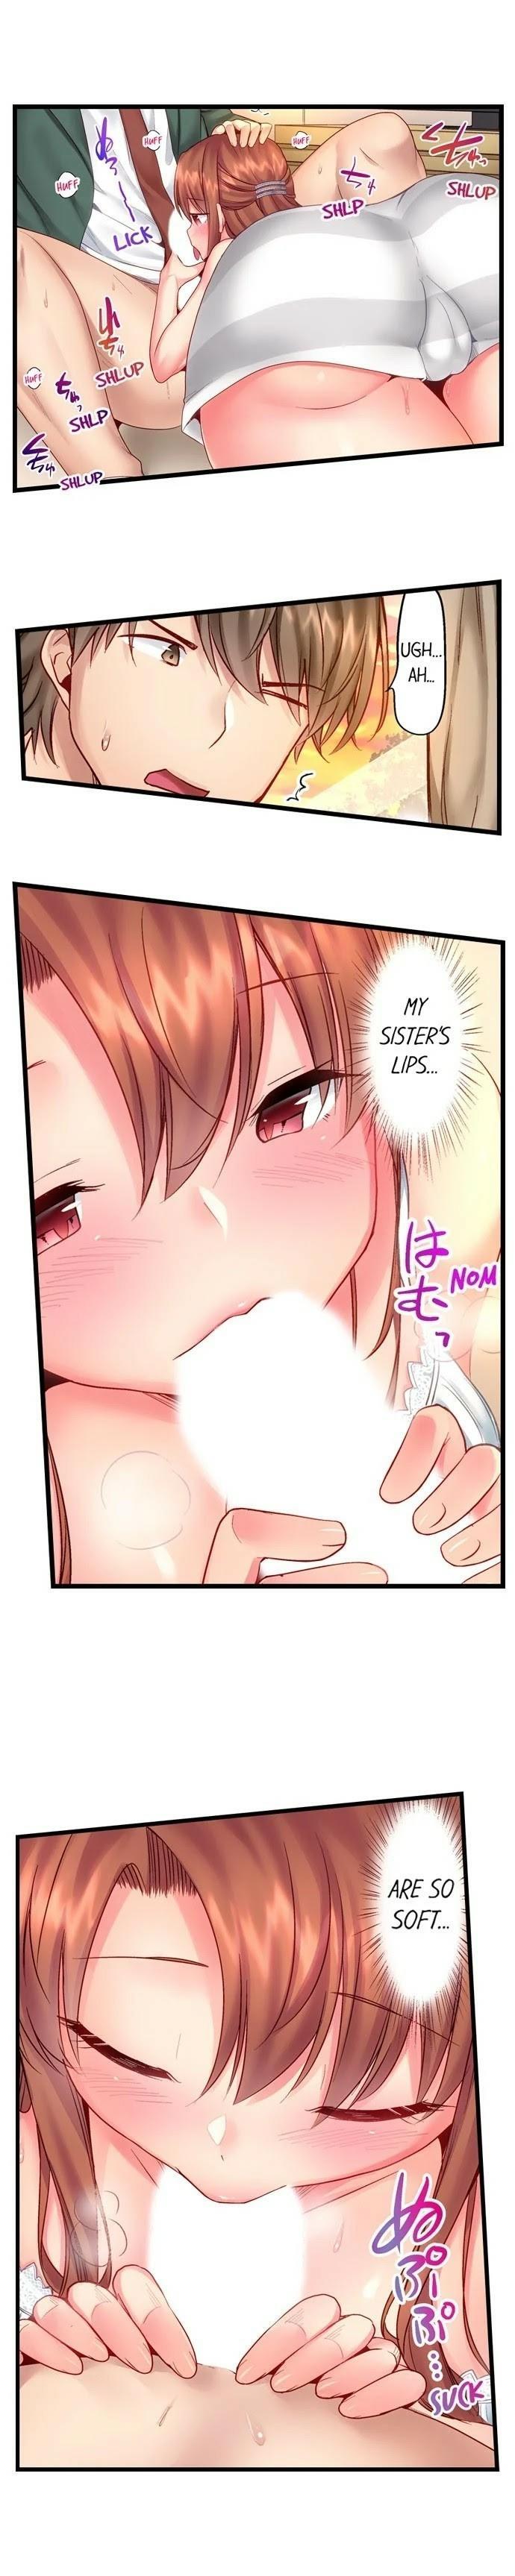 "Hypnotized" Sex with My Brother Ch.21/? 61